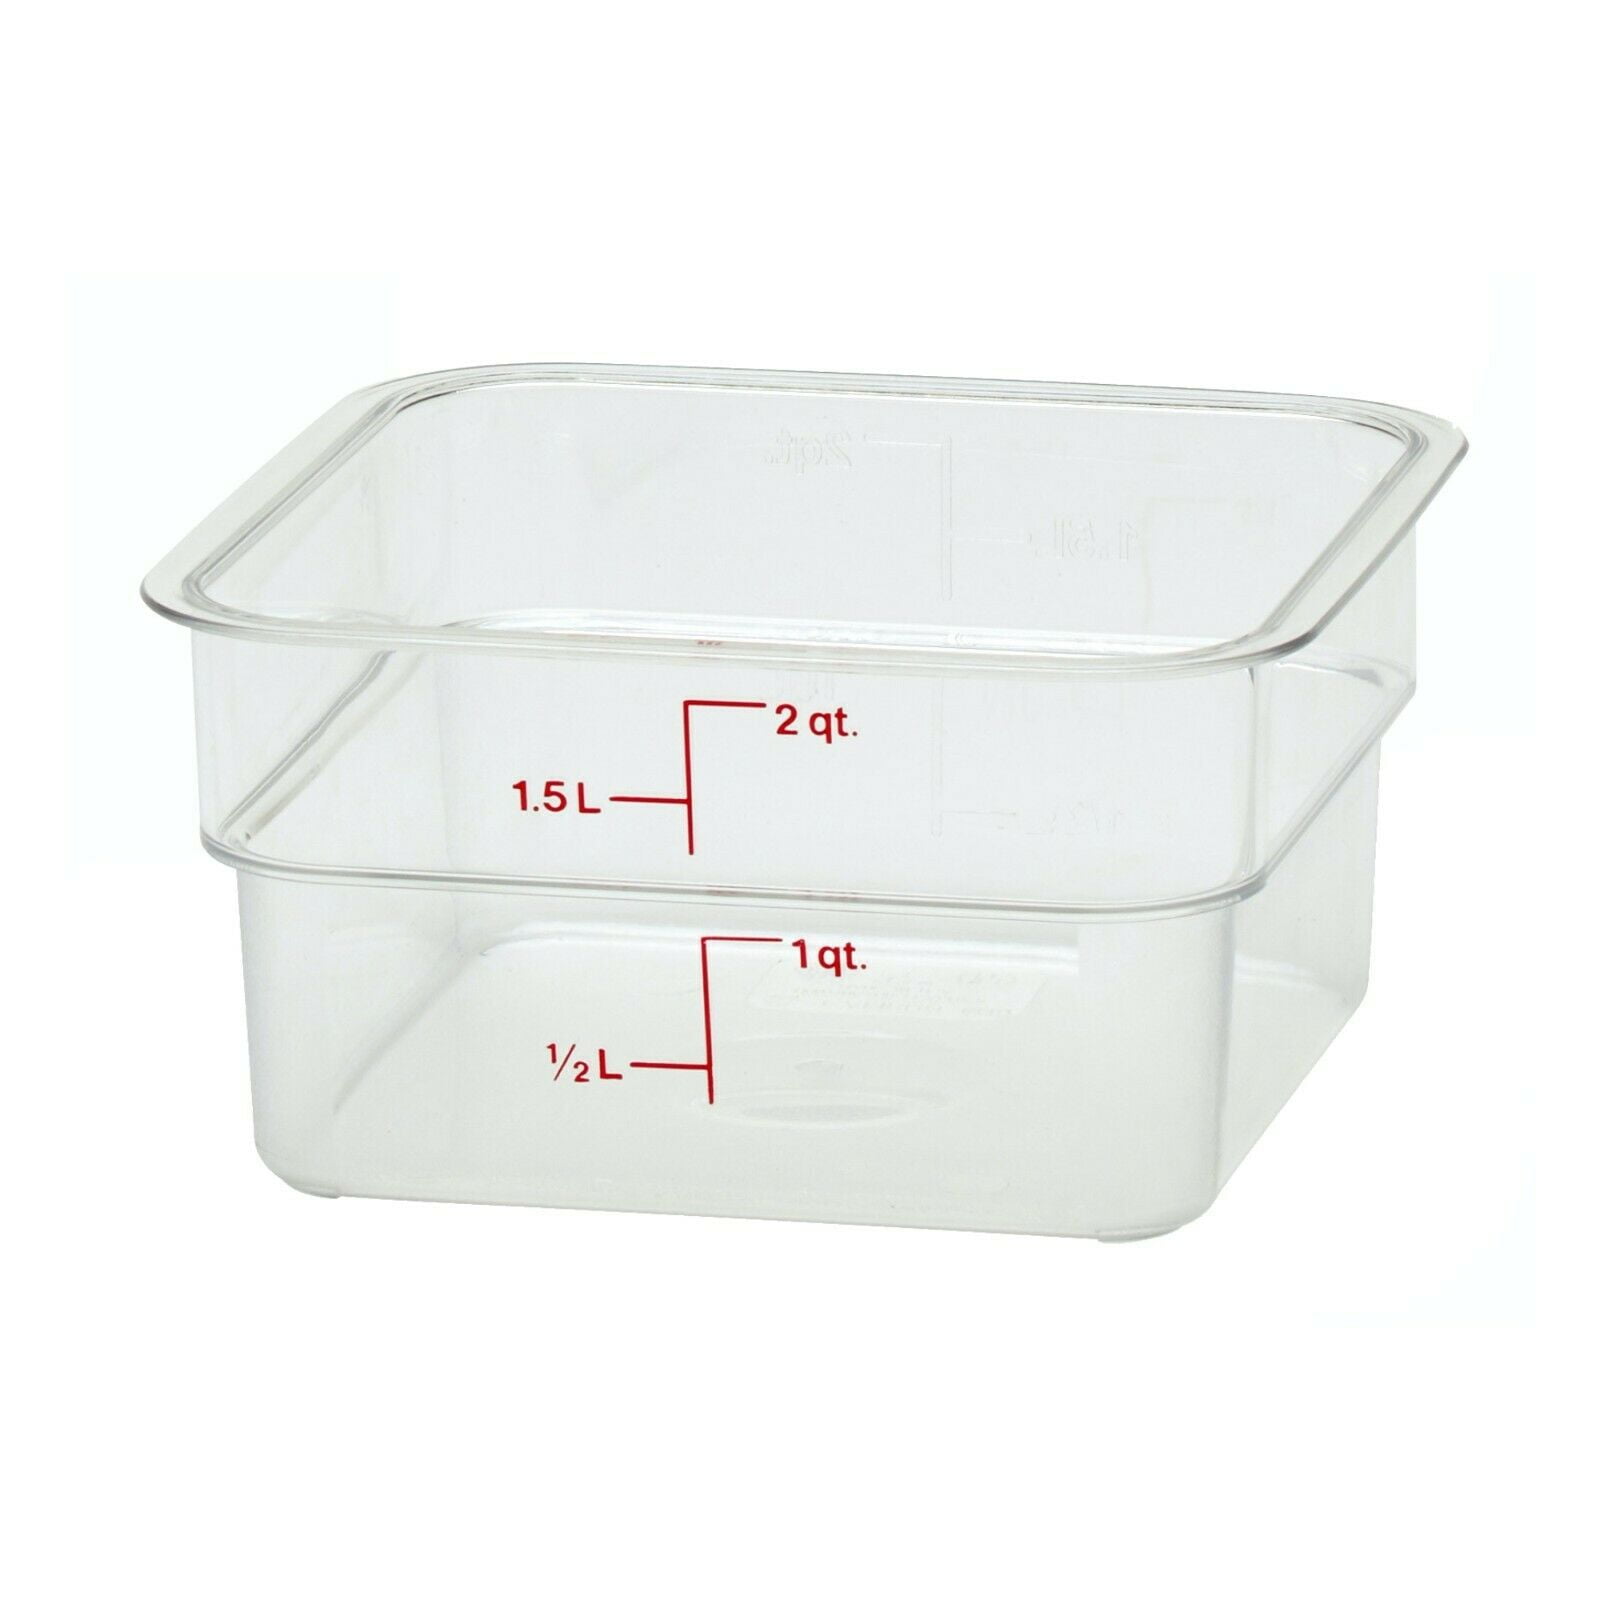 Cambro 2 Quart Clear Square Food Storage Containers with Lids, Set